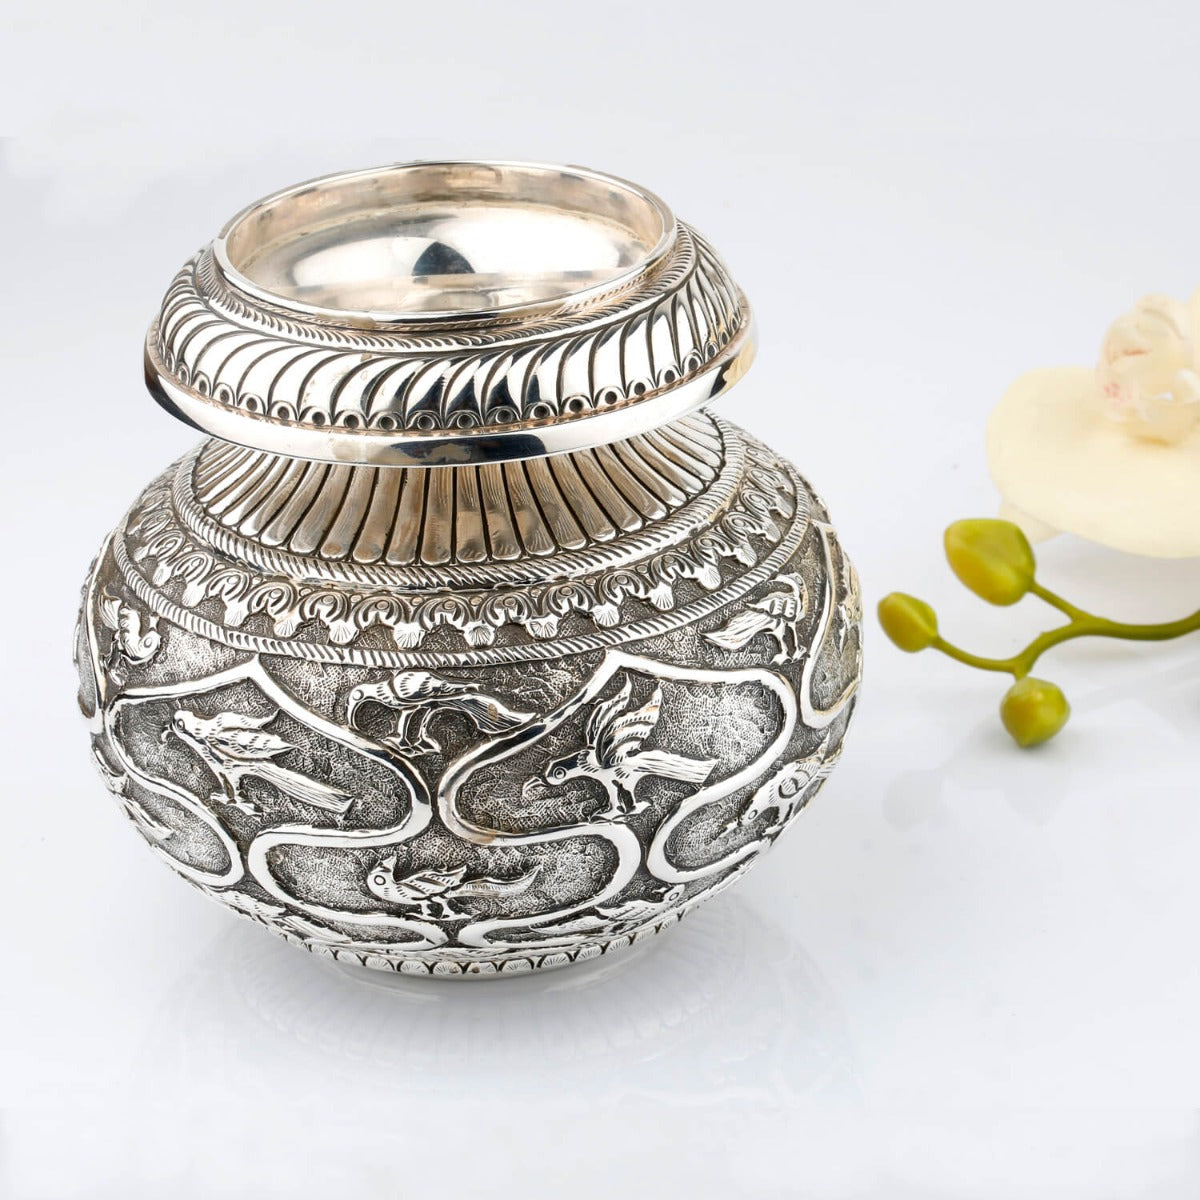 Exquisitively designed sterling silver pot